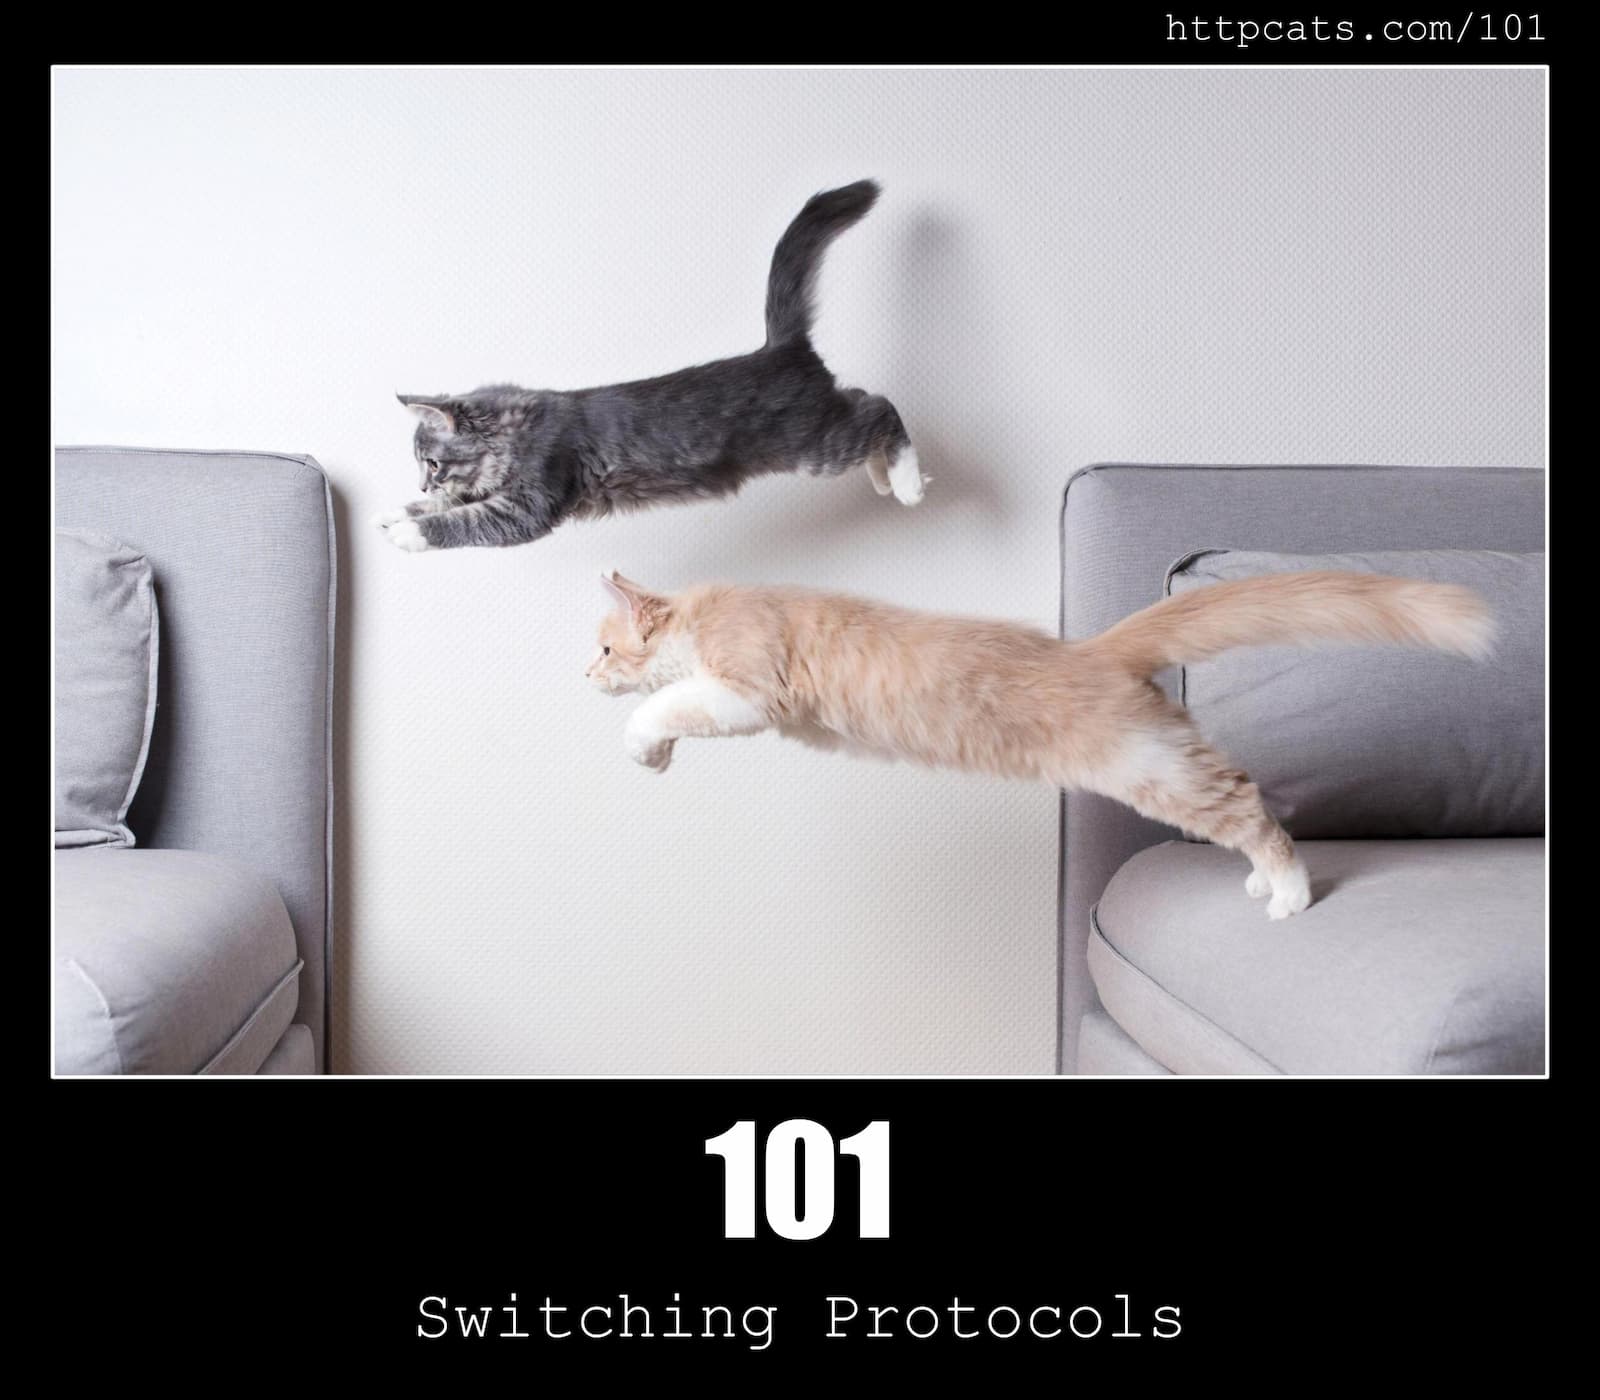 HTTP Status Code 101 Switching Protocols & Cats